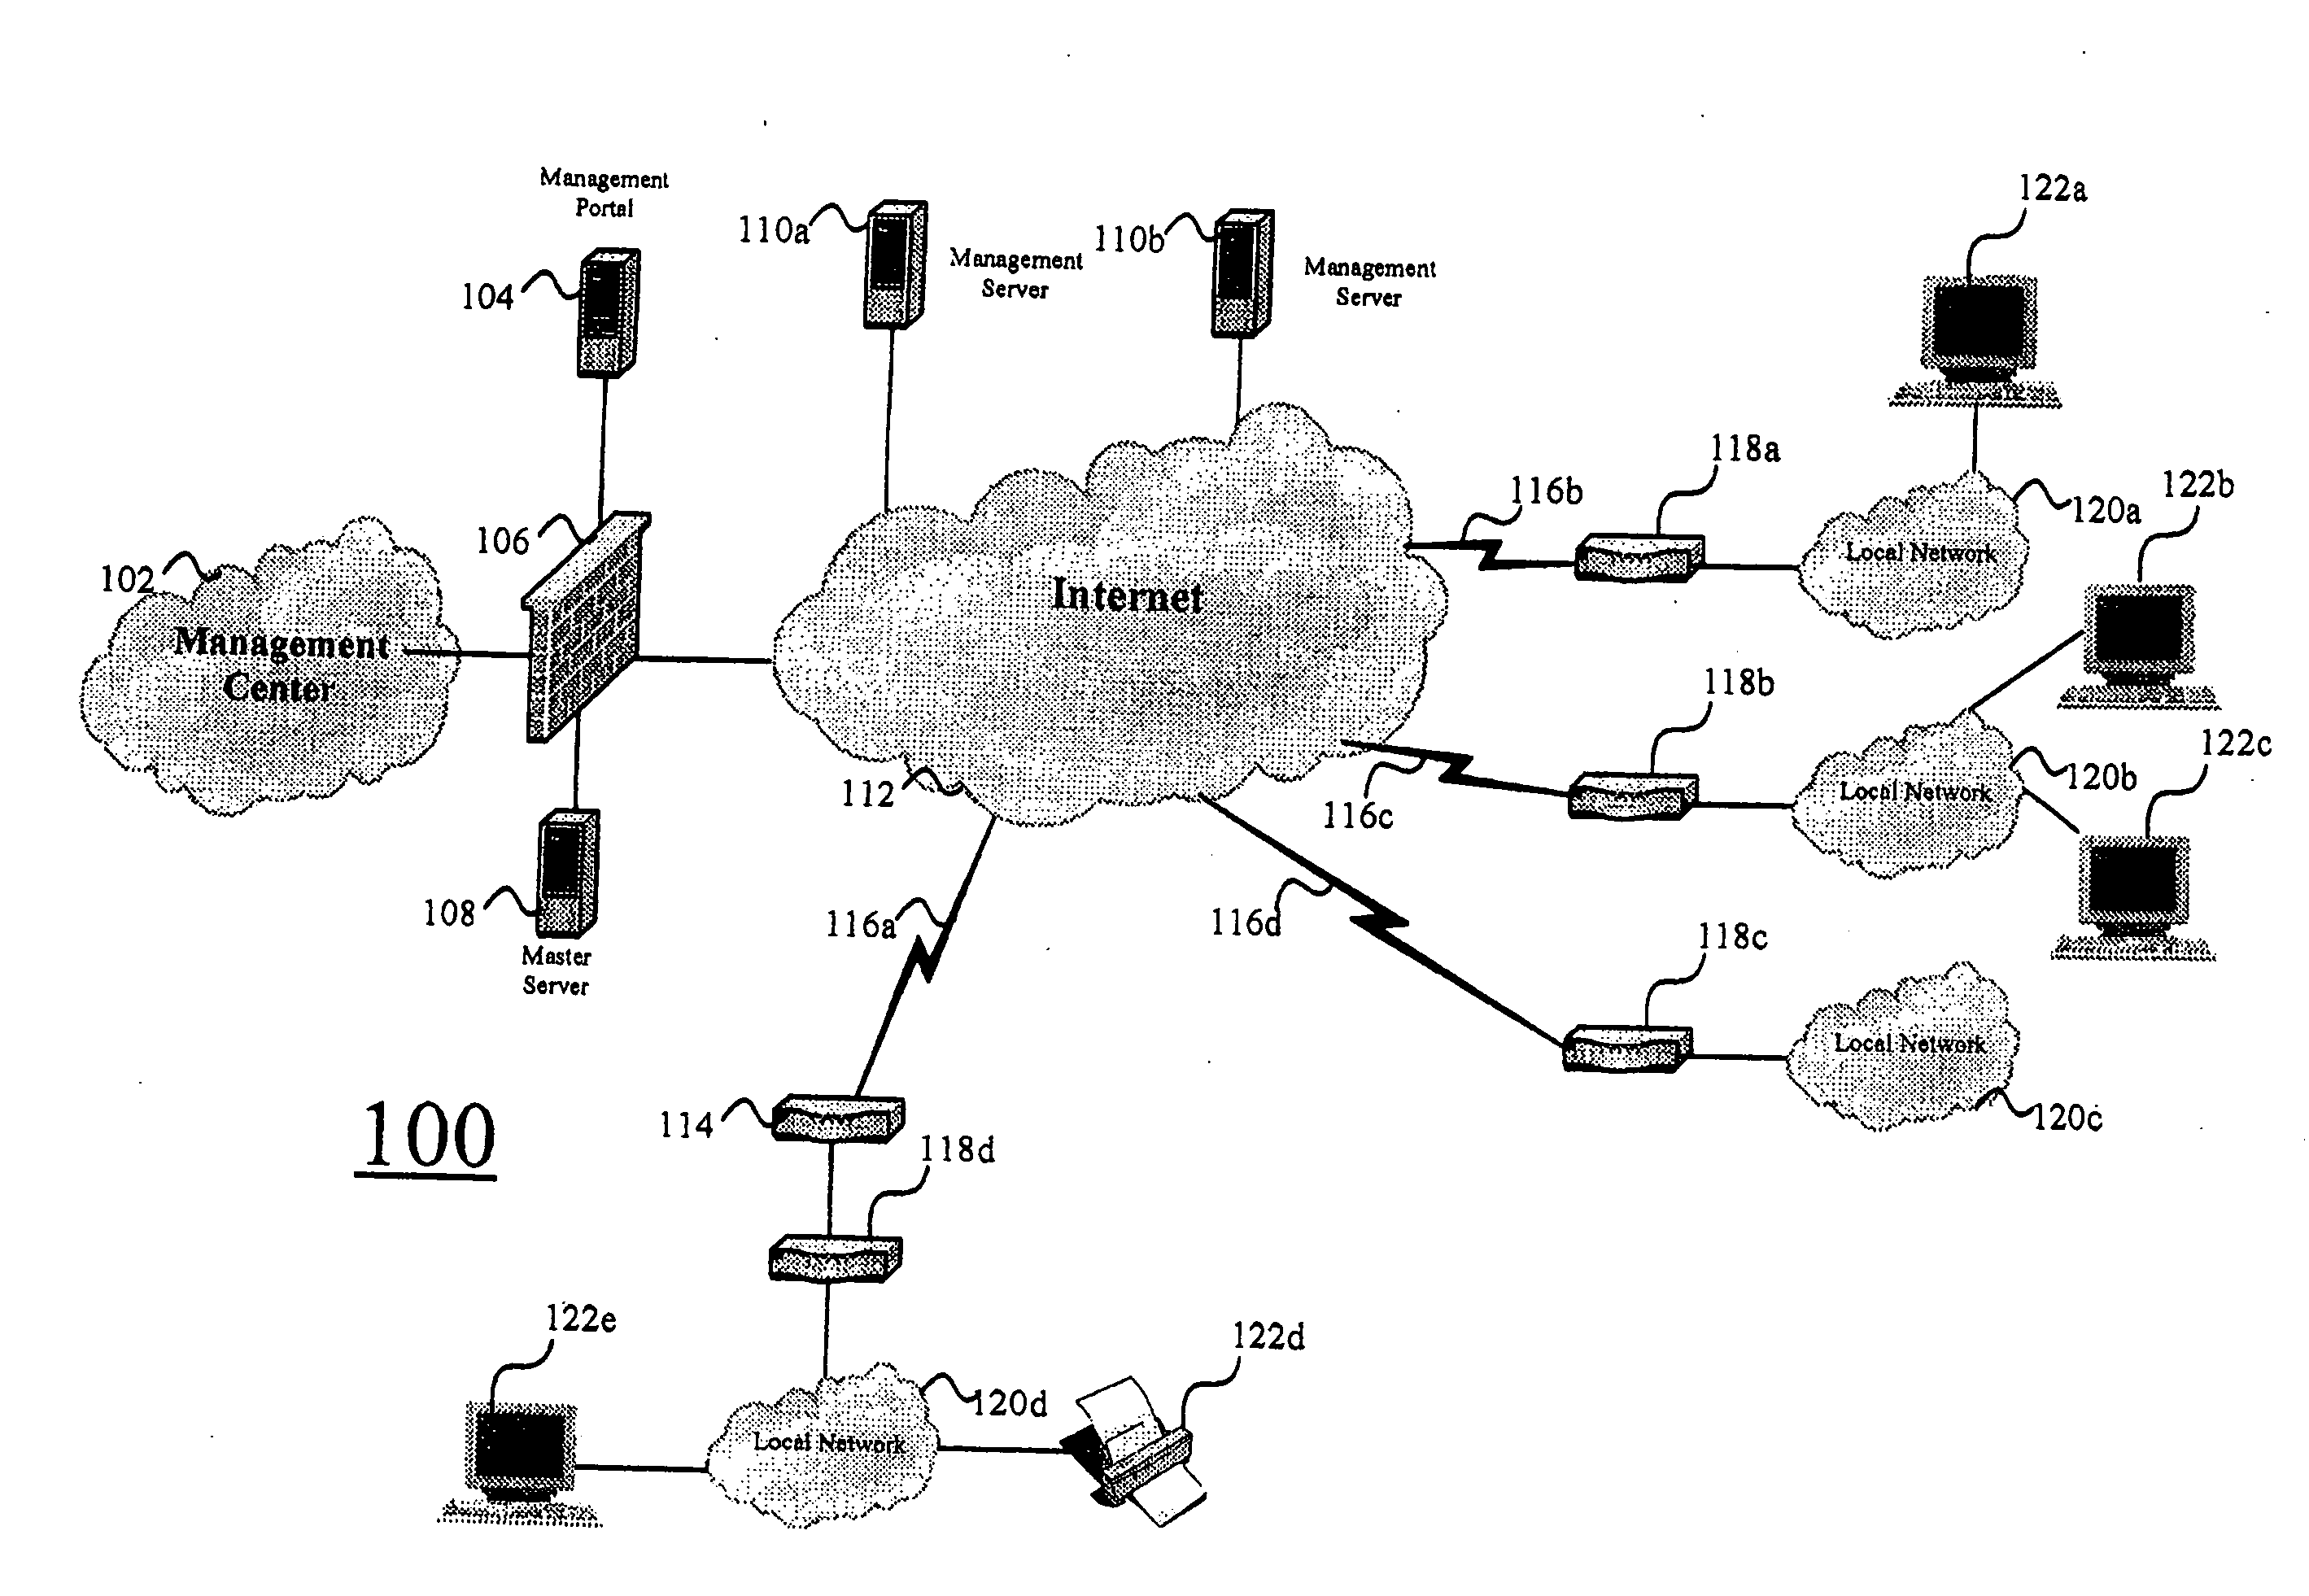 Systems and methods for automatically configuring network devices